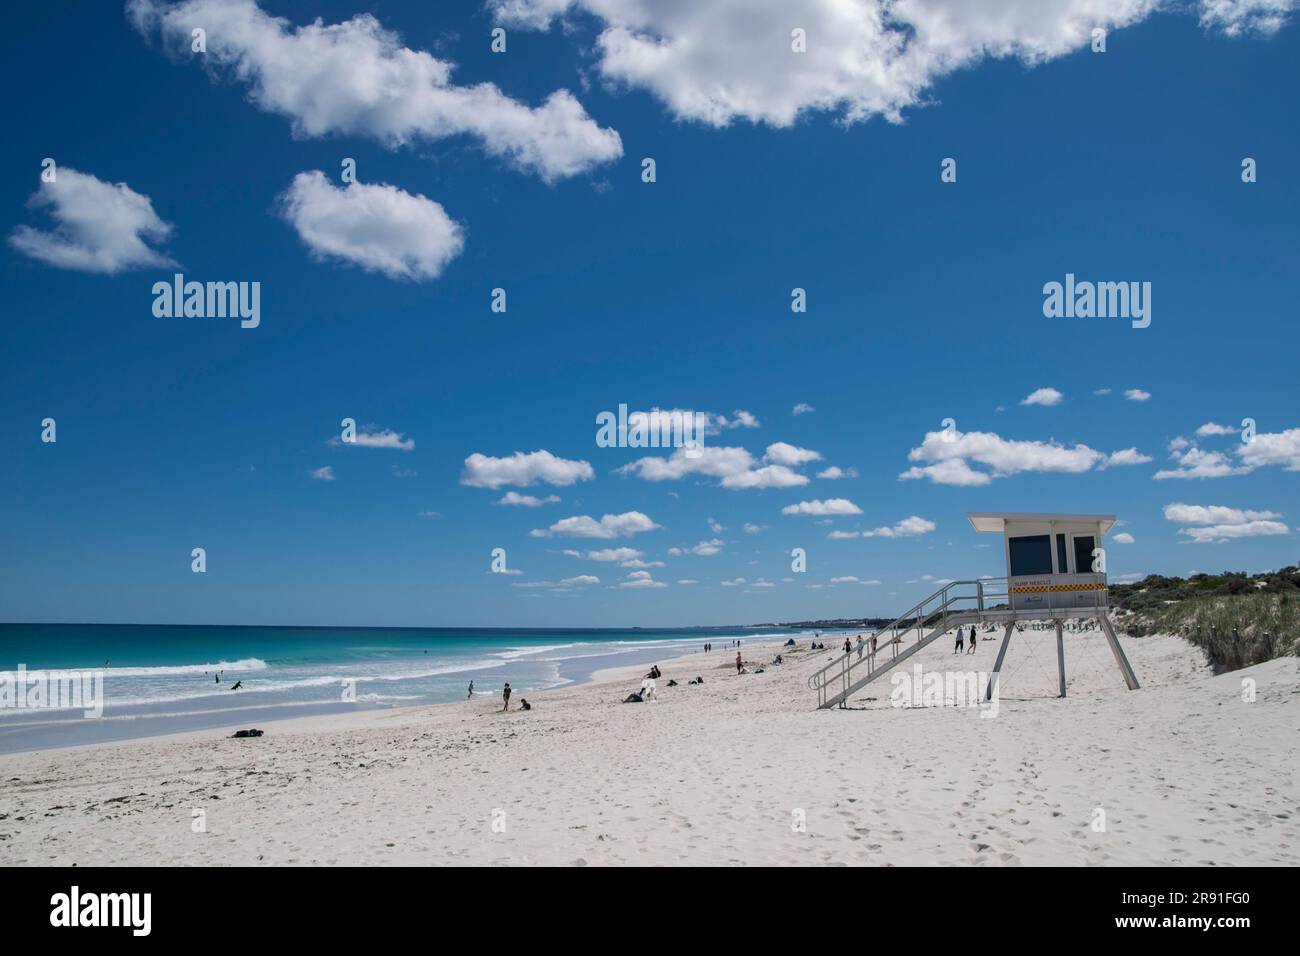 View of the white sand beach and lifeguard station on Scarborough Beach near Perth in Western Australia Stock Photo